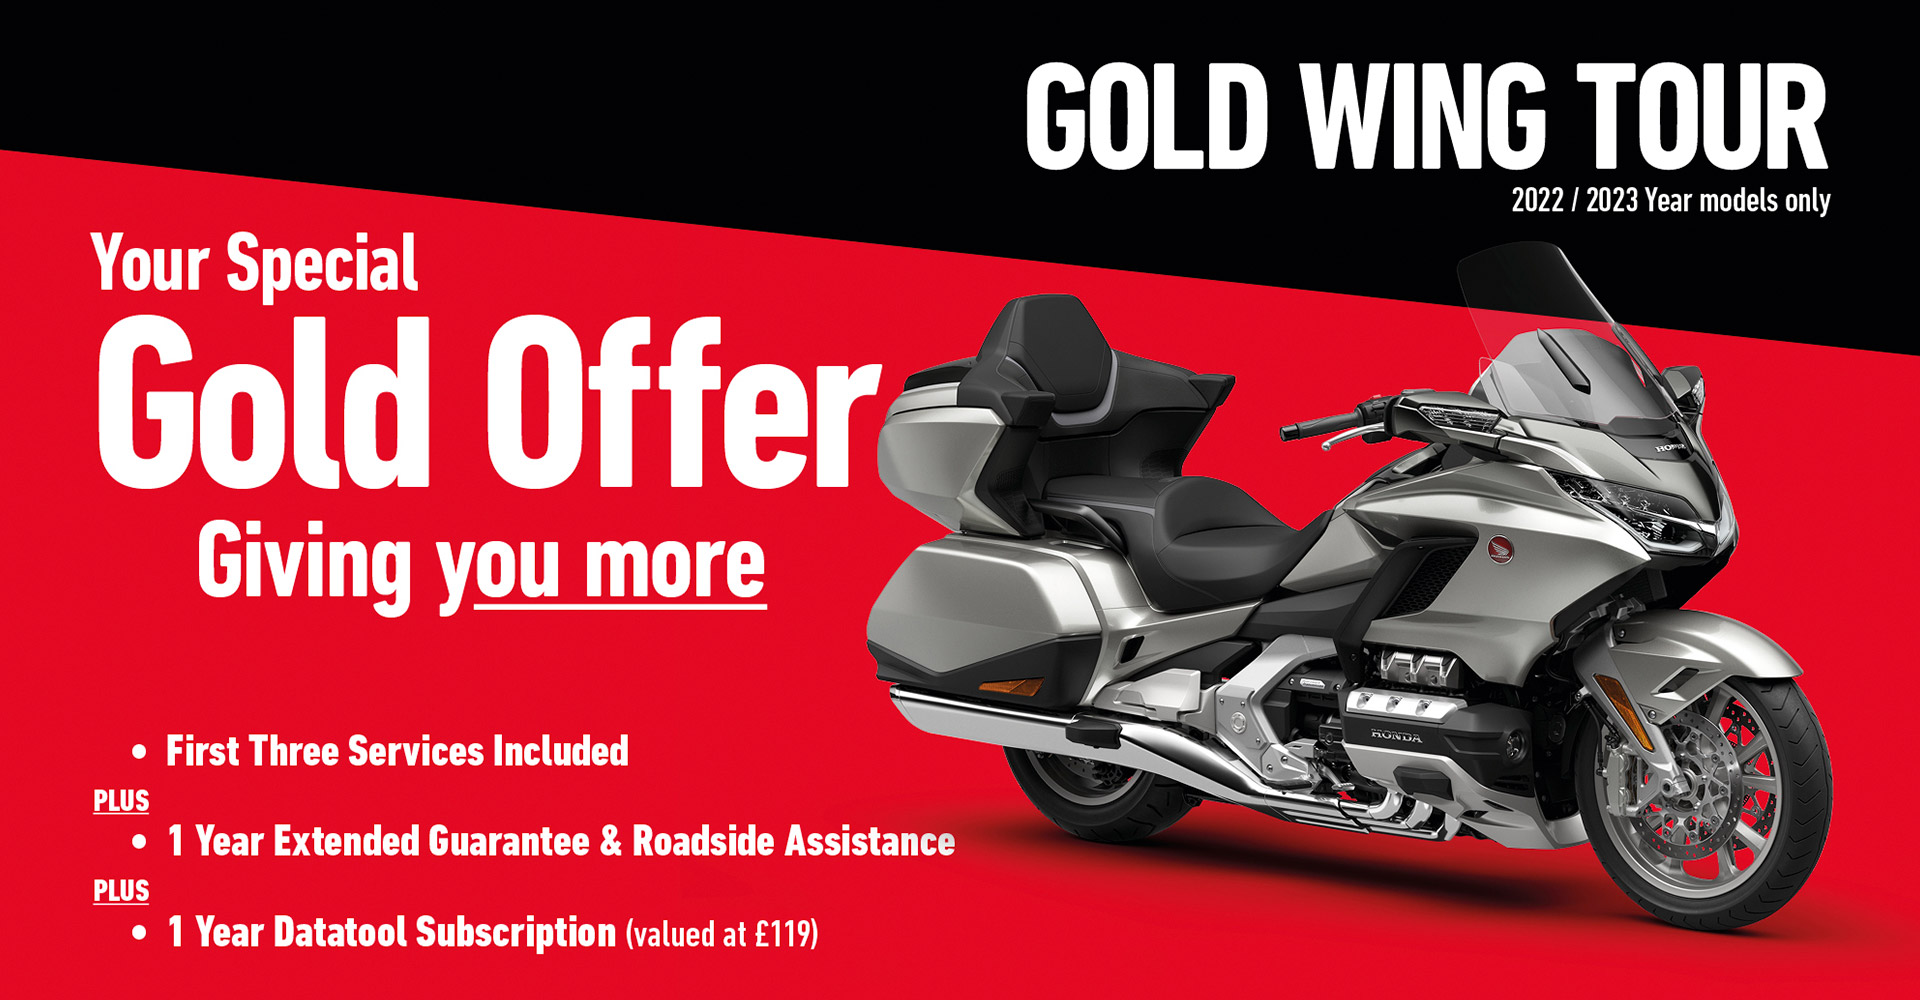 GL1800 GOLD WING TOUR 23YM Offer